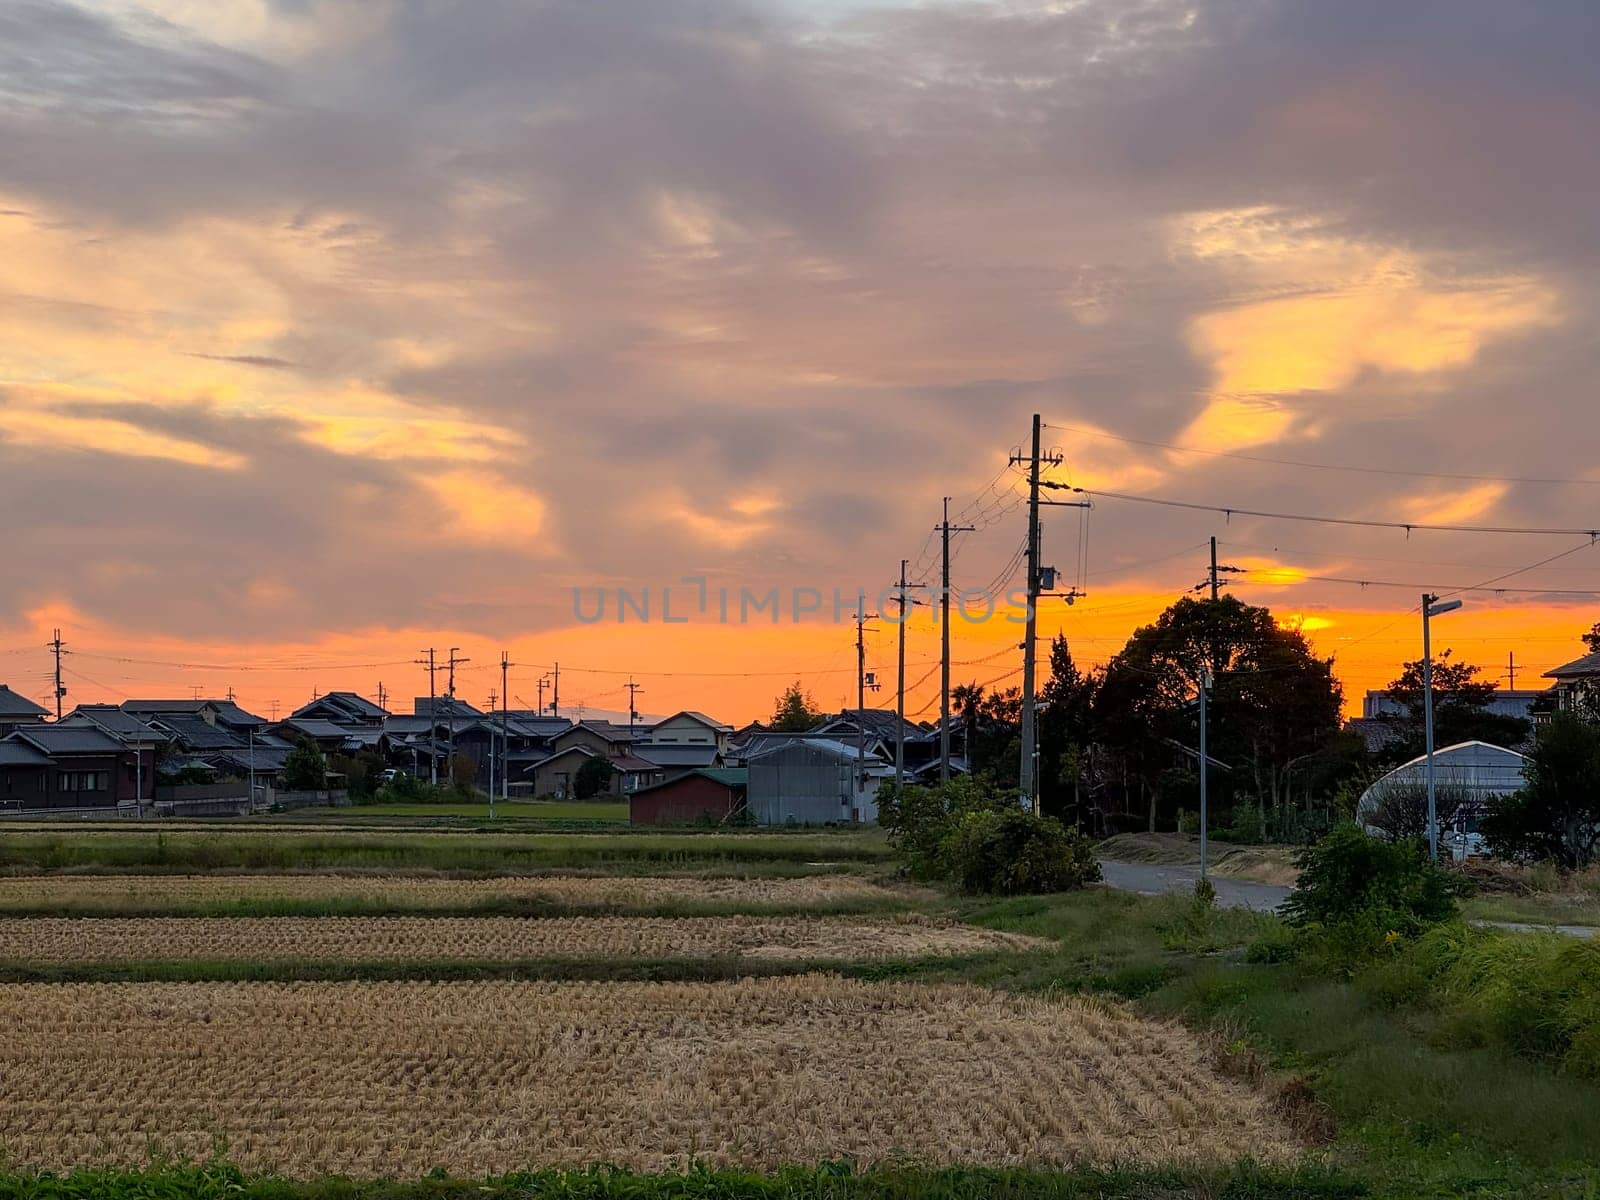 Sunset on rural Japanese village and dry harvested rice field in fall by Osaze